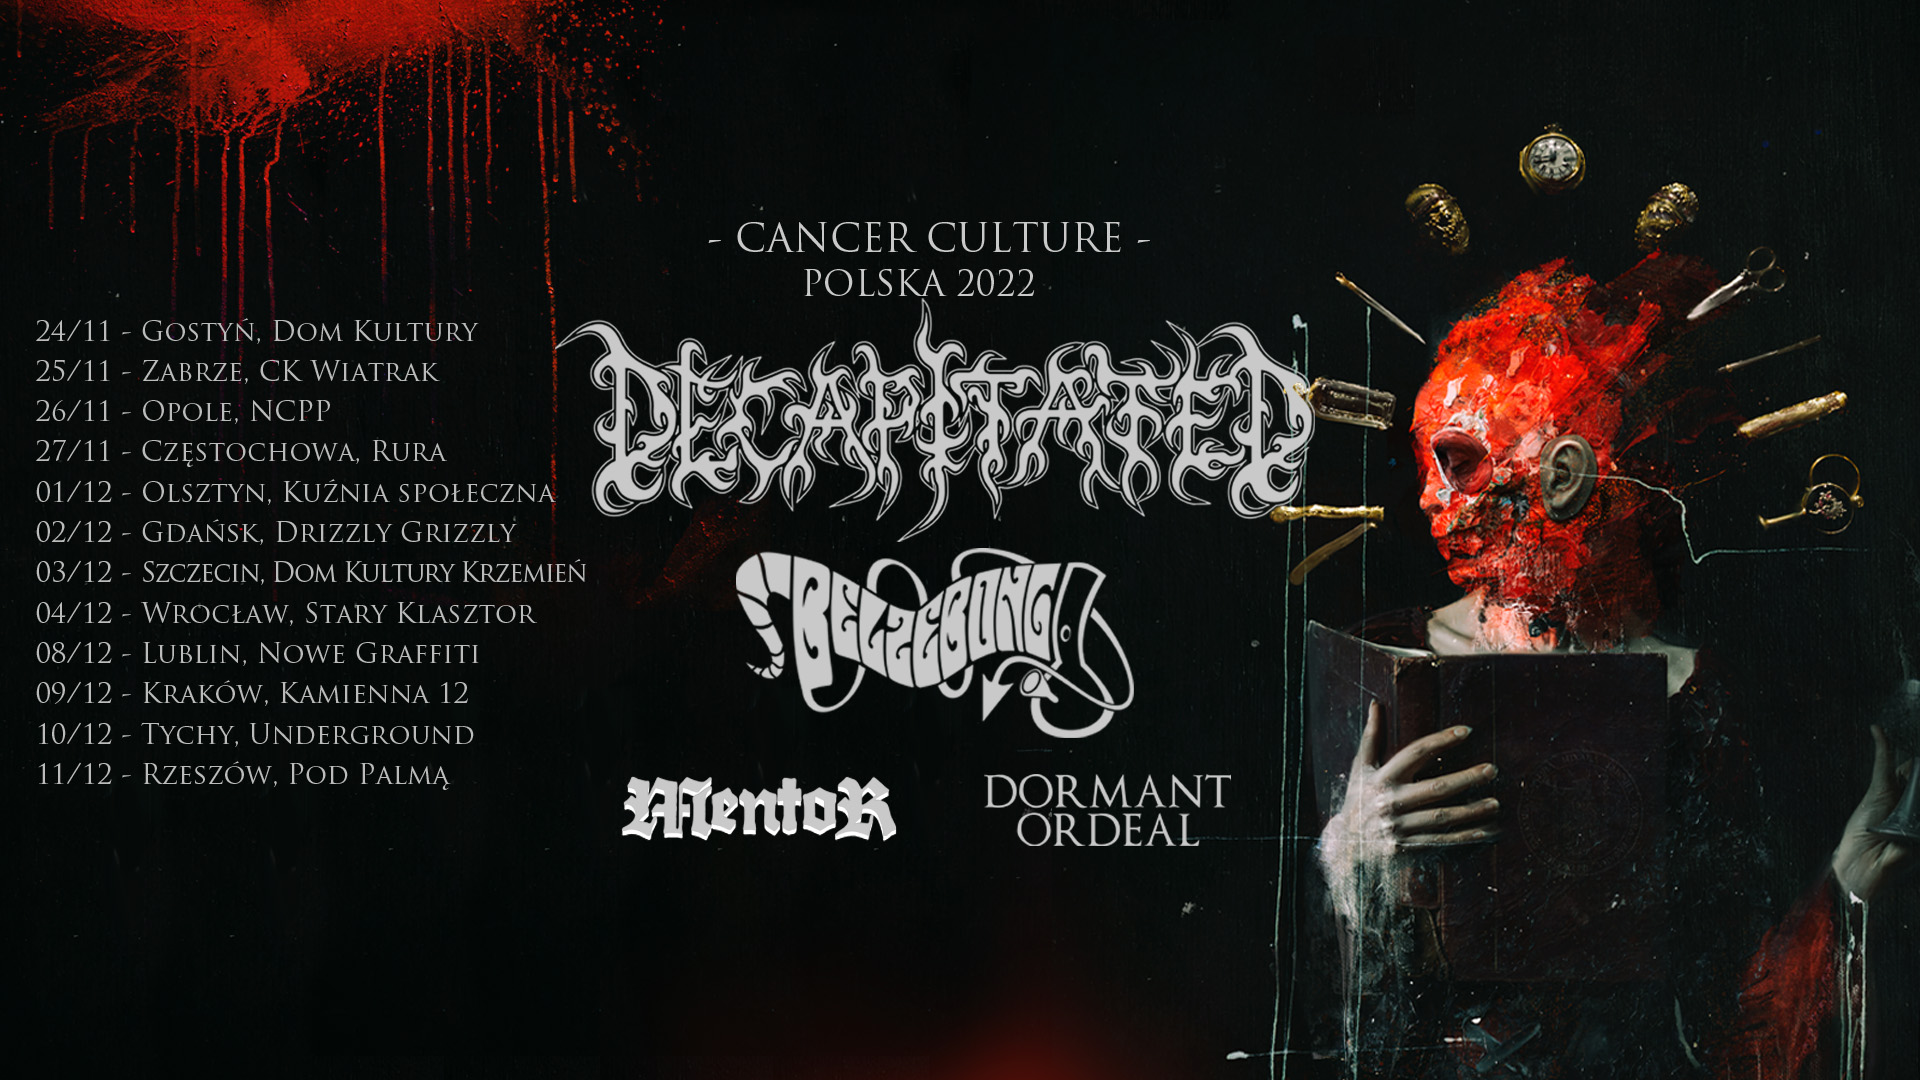 Cancer Culture: Decapitated, Belzebong, Mentor, Dormant Ordeal; Drizzly Grizzly, Gdańsk; 2 grudnia 2022